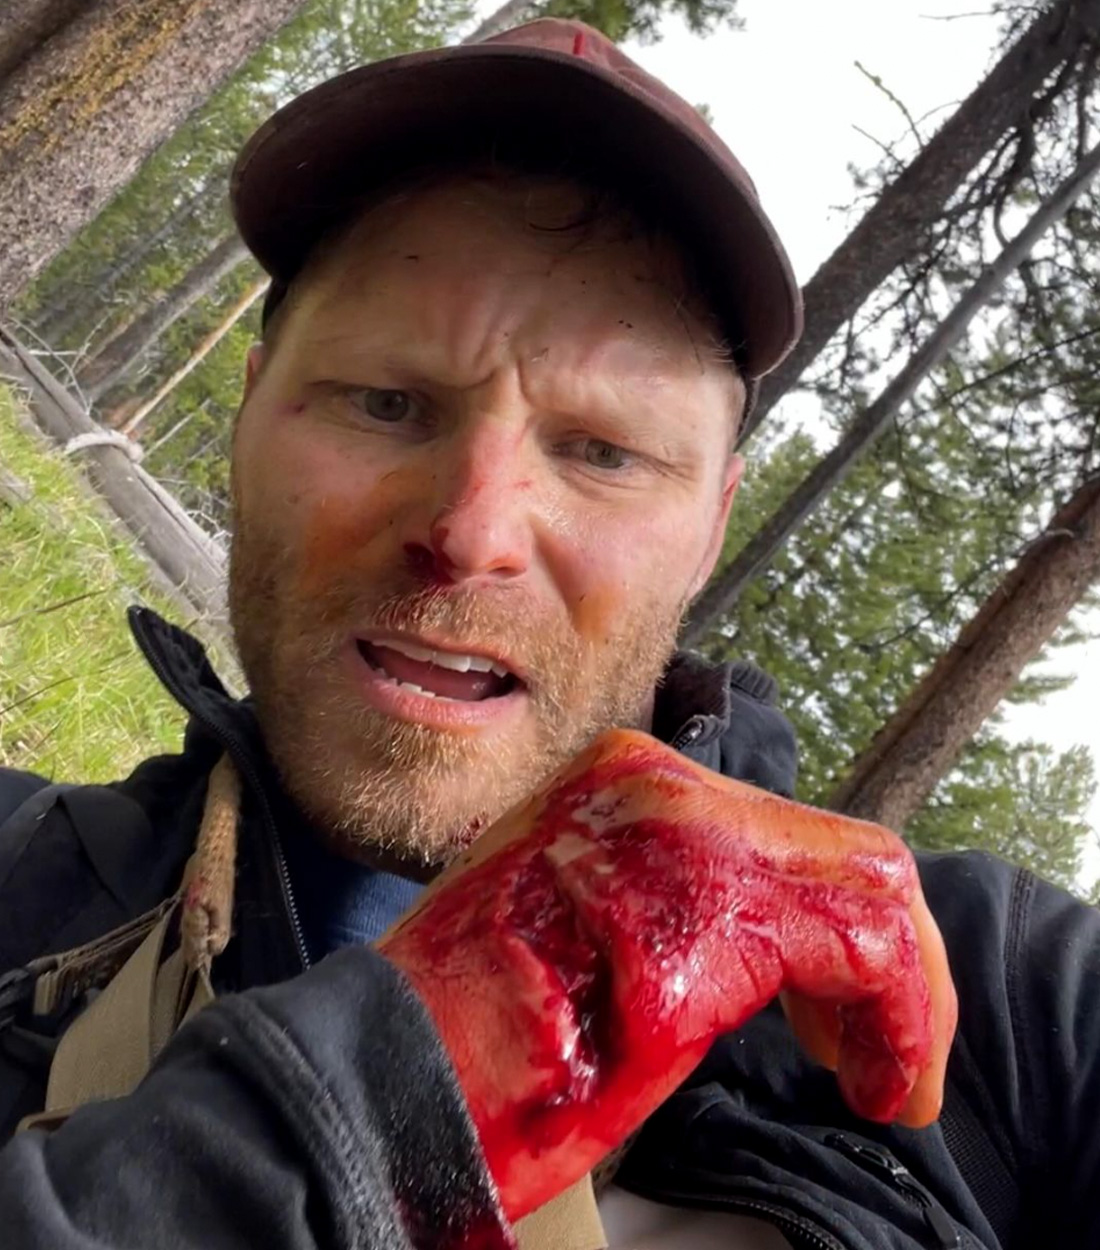 Grizzly bear attack victim shows his wound.